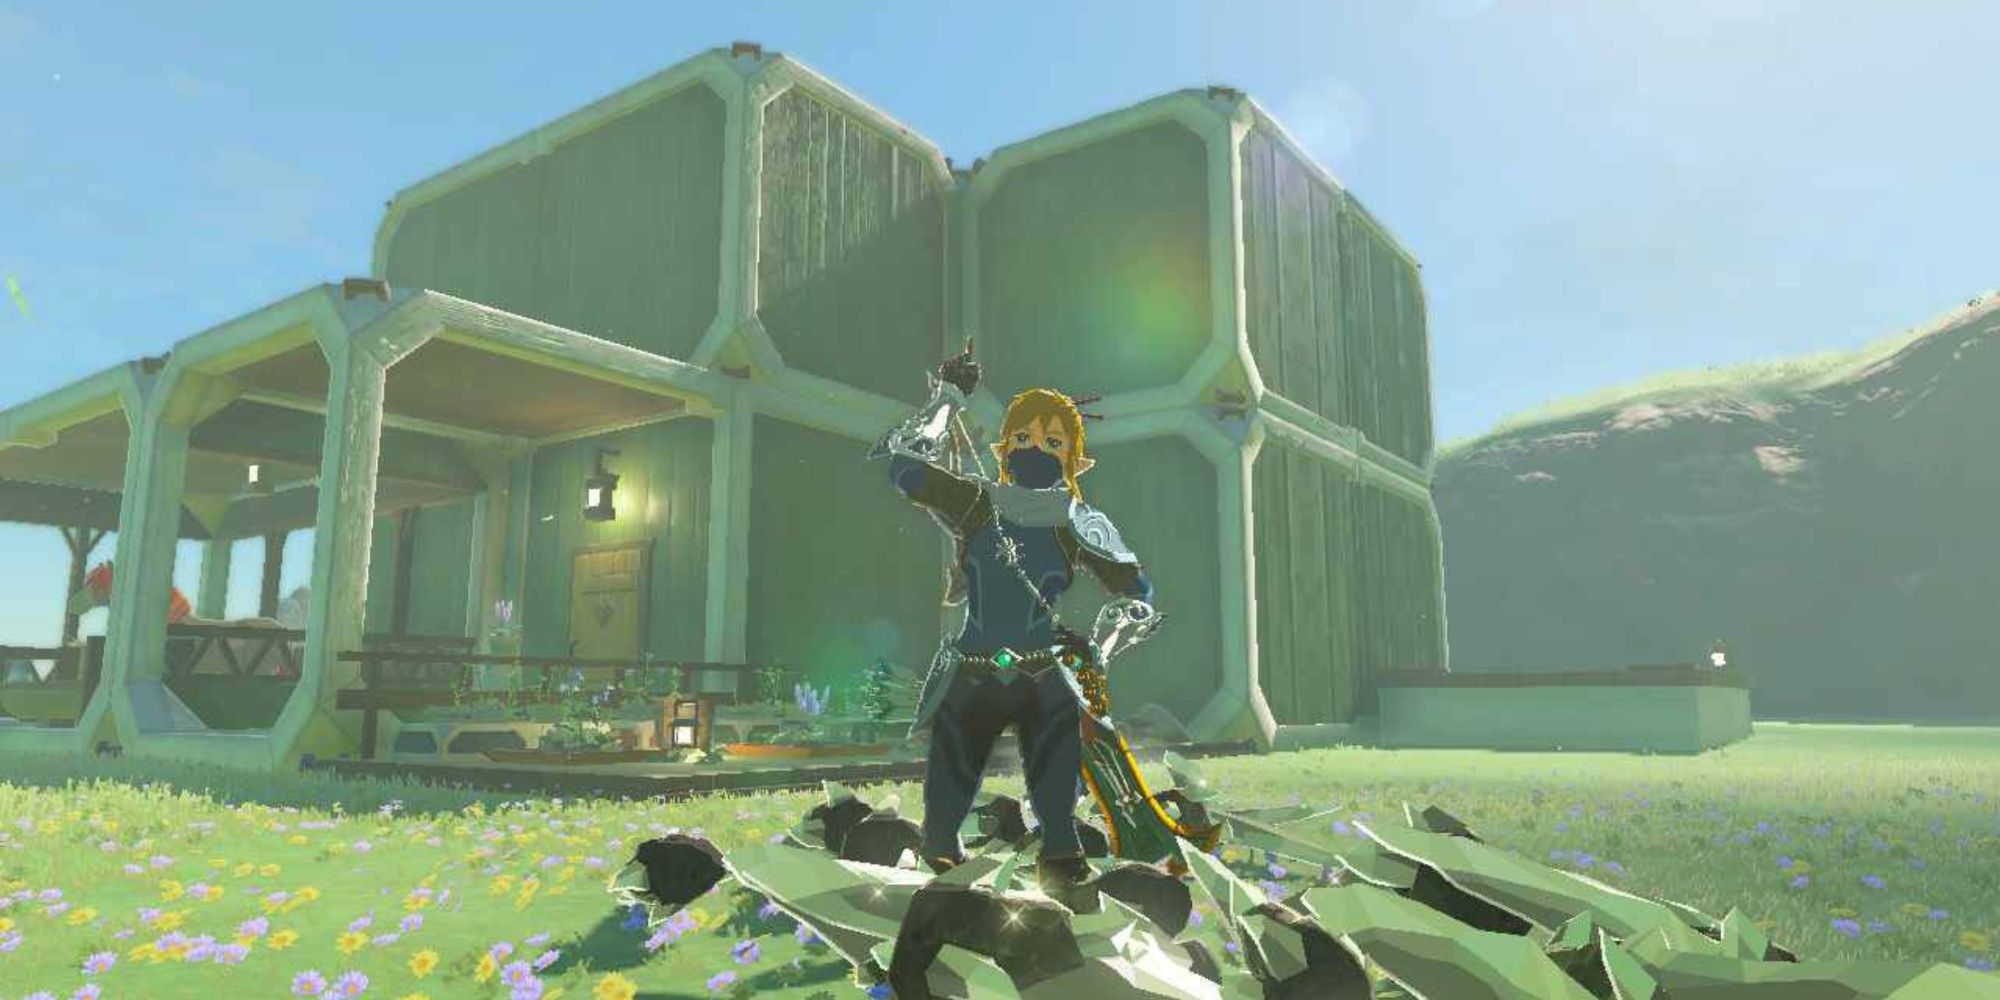 Breath of the Wild' Changed the Way I Play Video Games